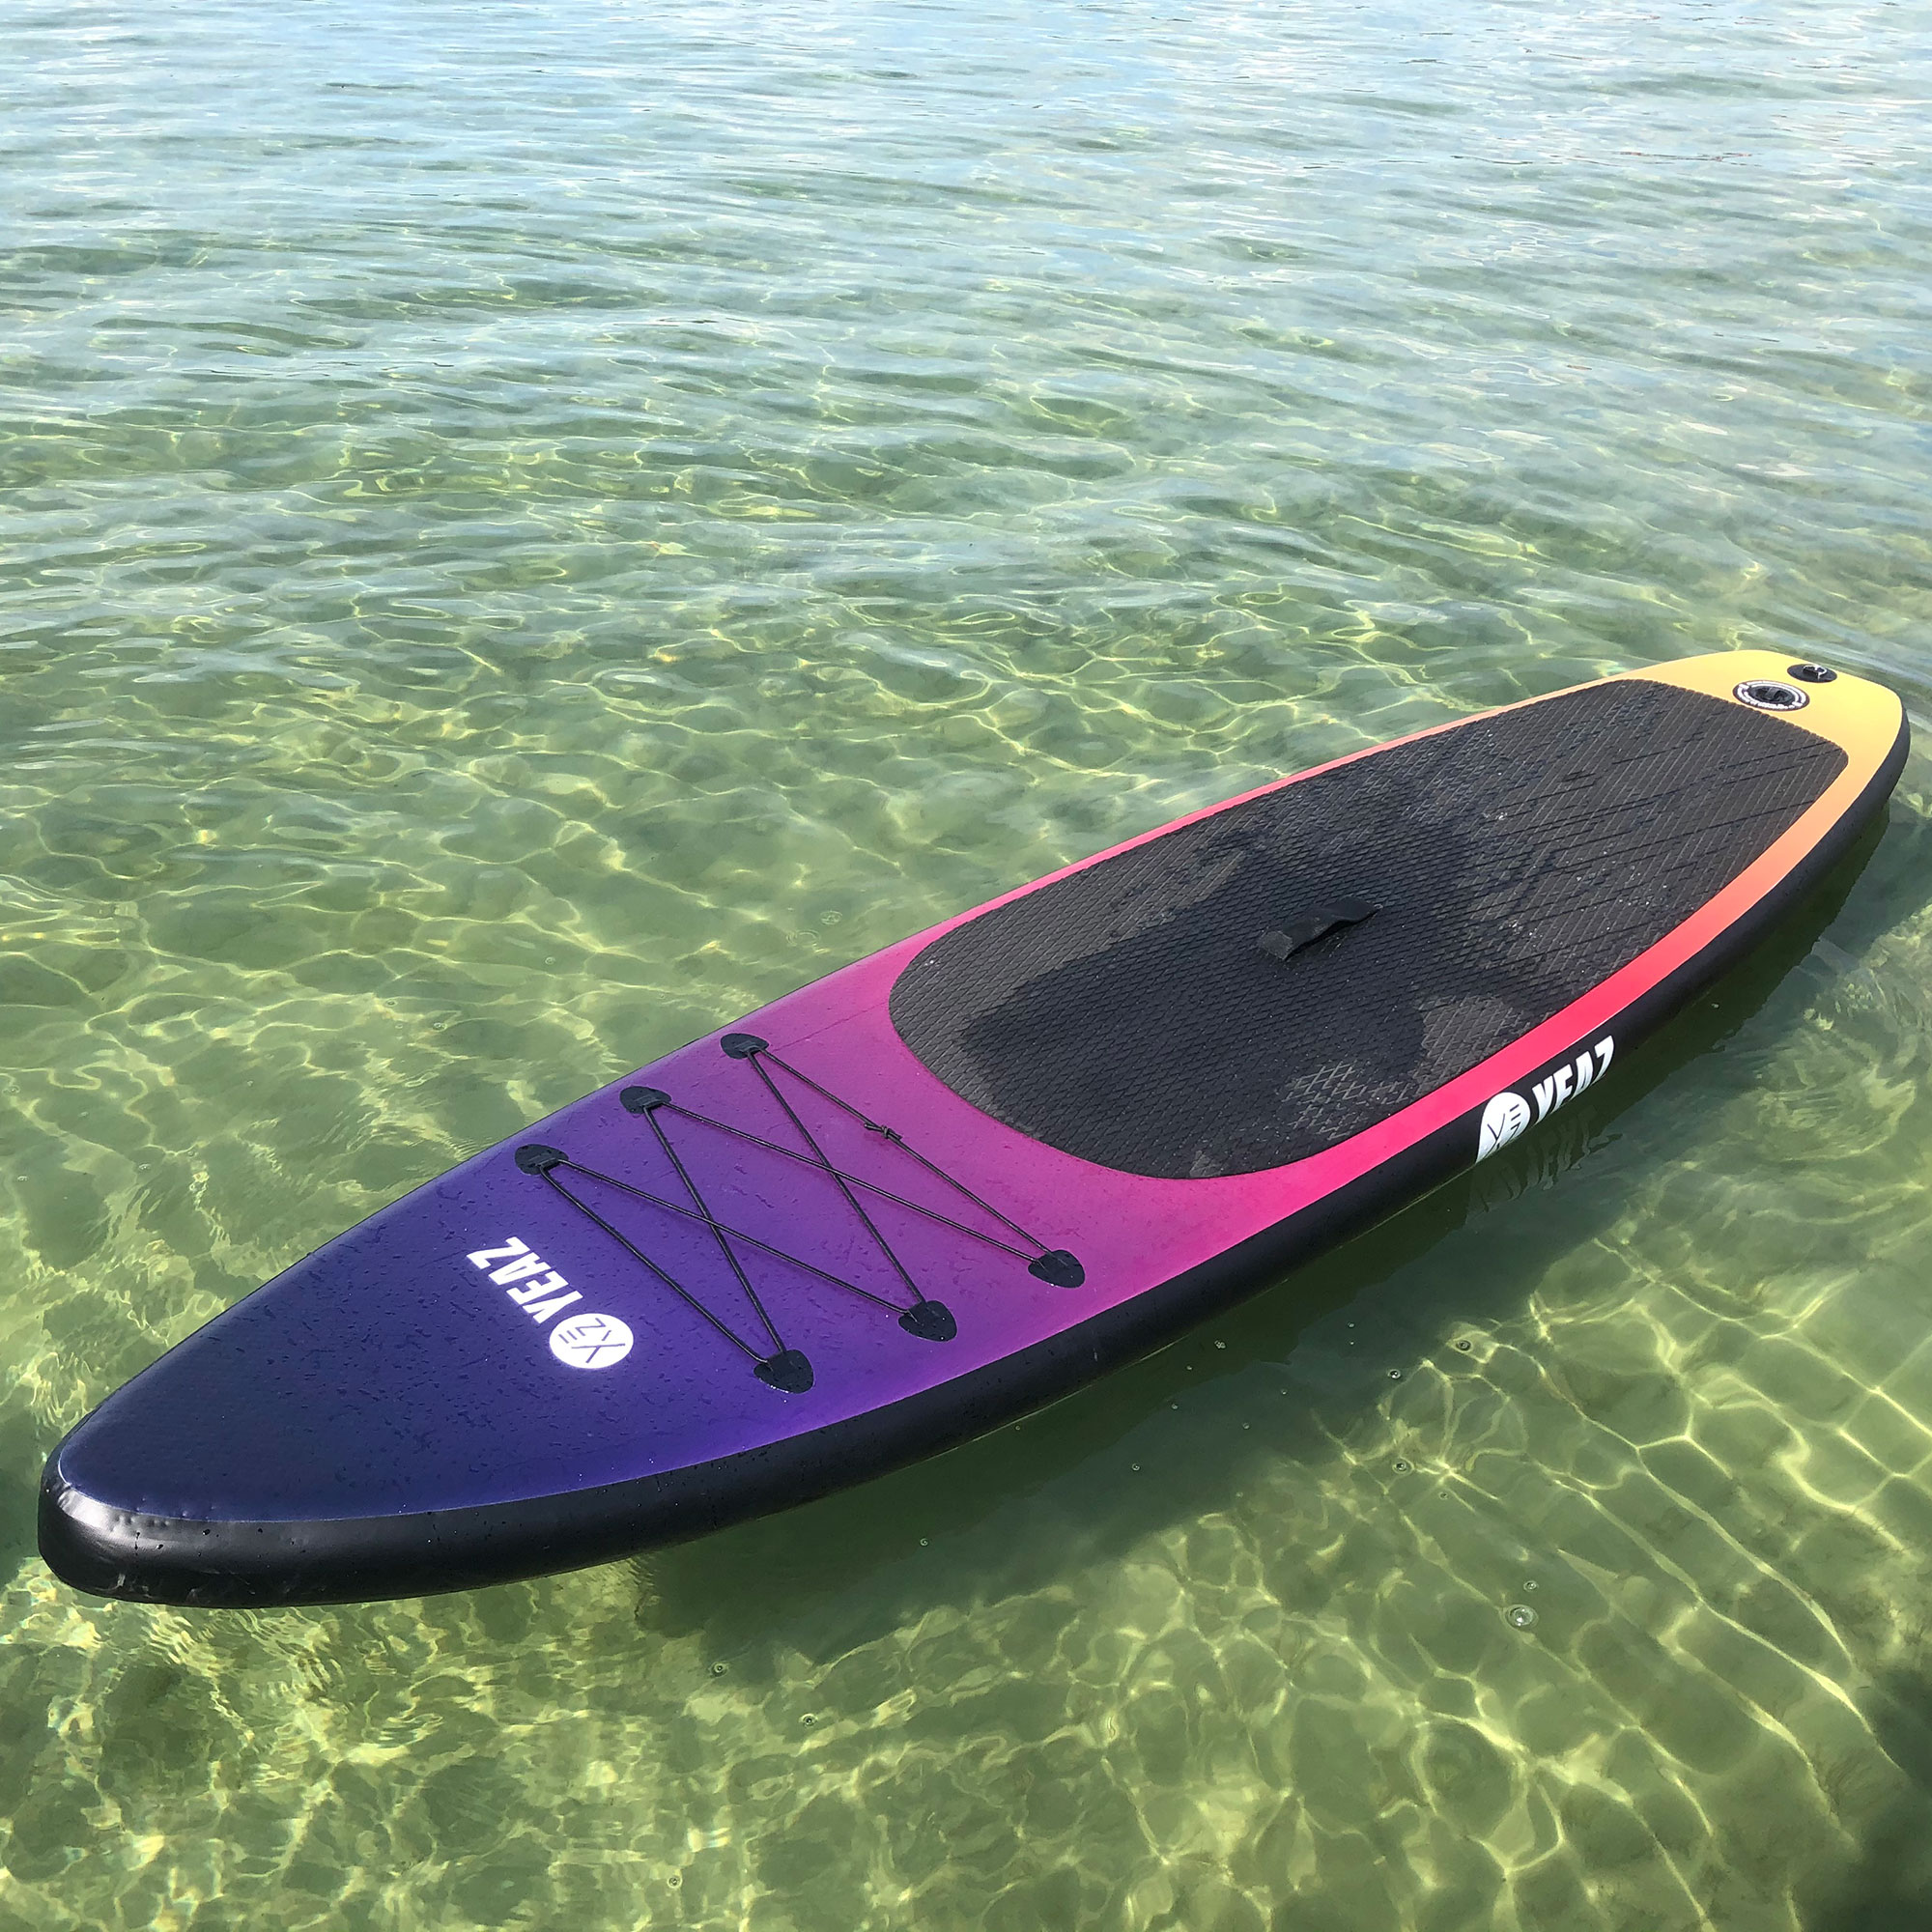 YEAZ SUNSET BEACH - EXOTRACE purple - violet SUP